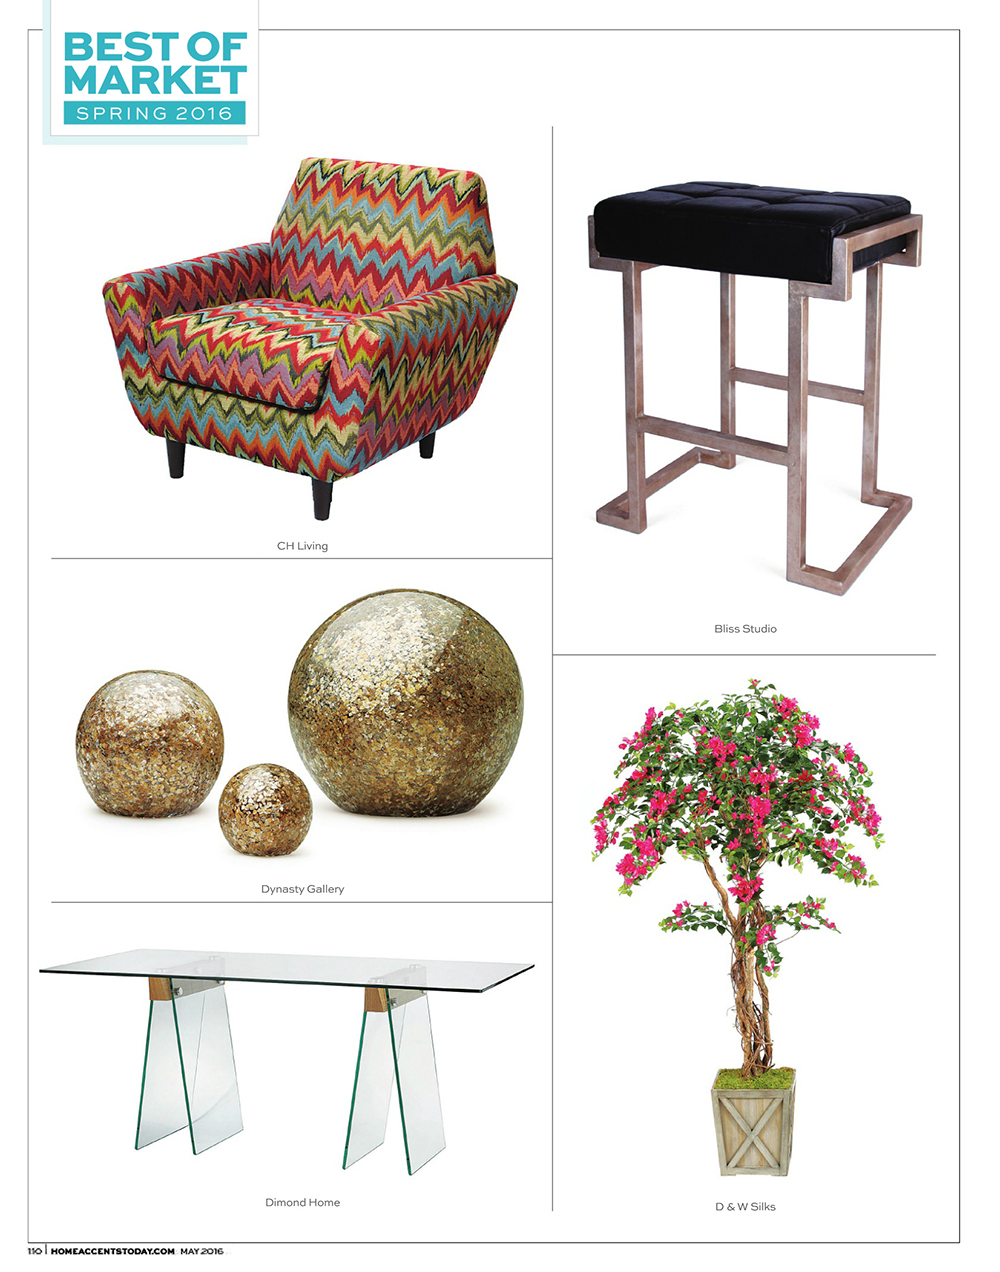 Home Accents Today - Best of Market - Spring 2016